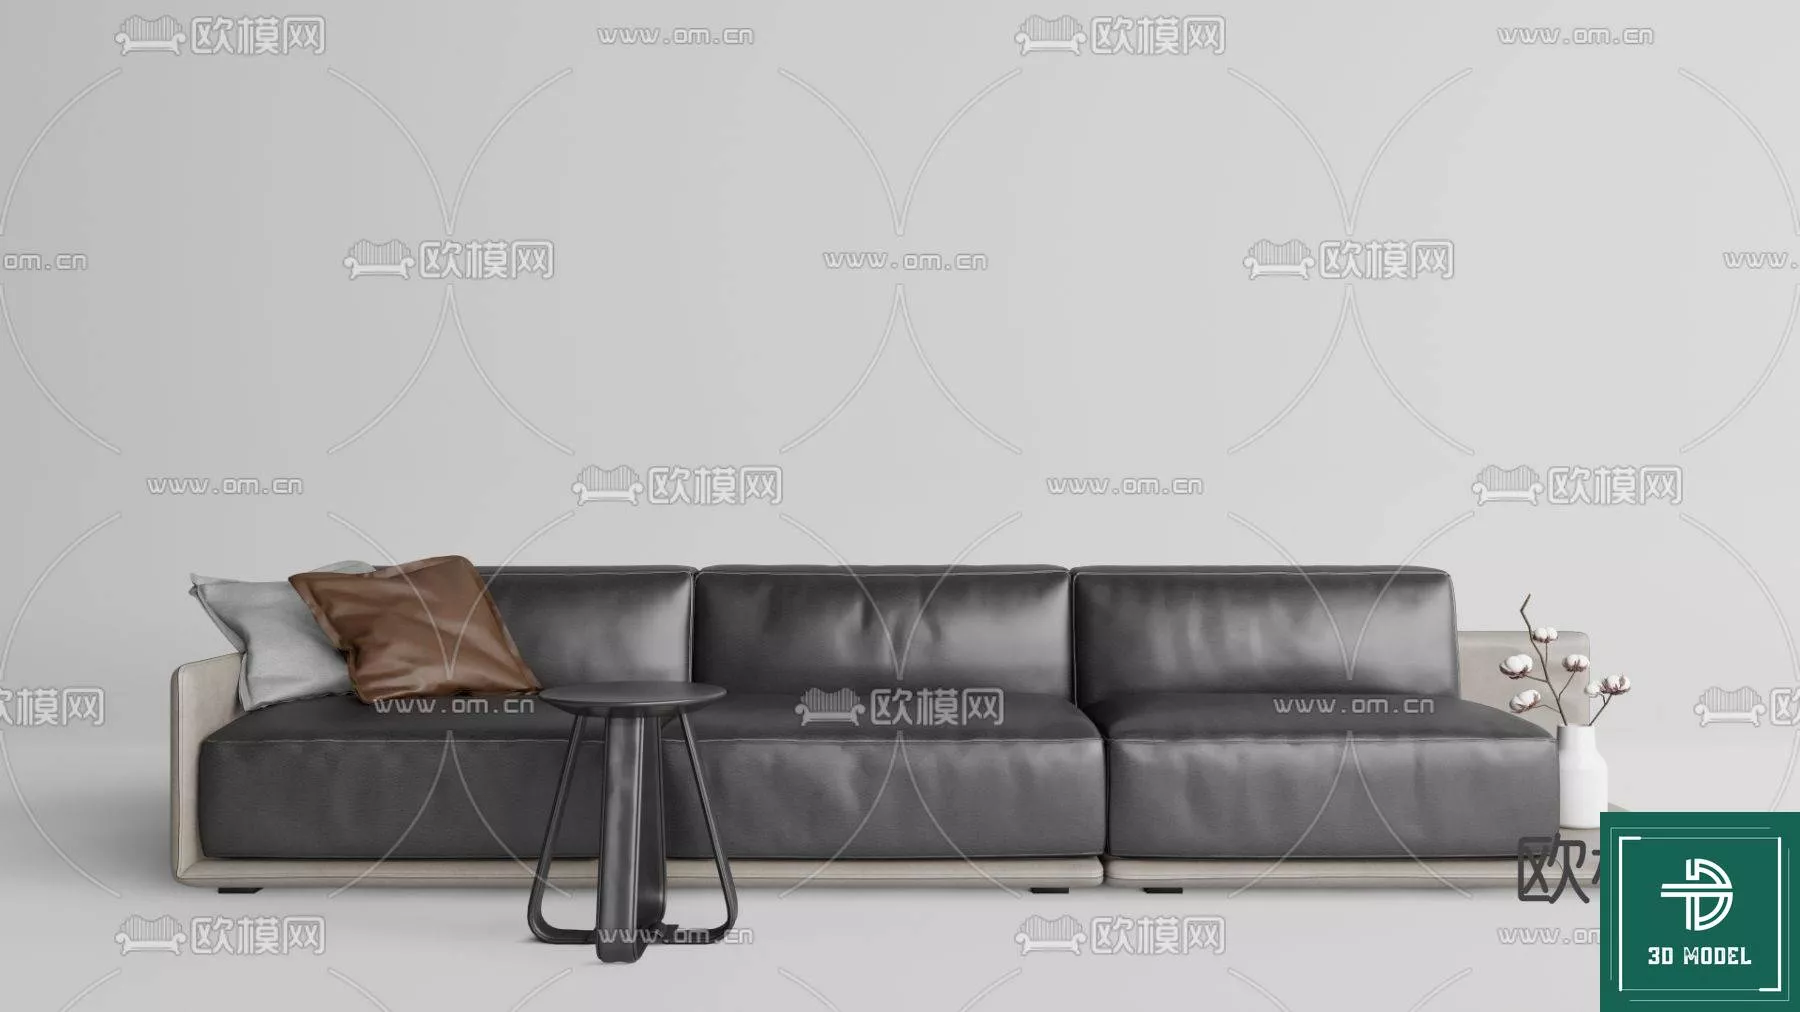 MODERN SOFA - SKETCHUP 3D MODEL - VRAY OR ENSCAPE - ID13218